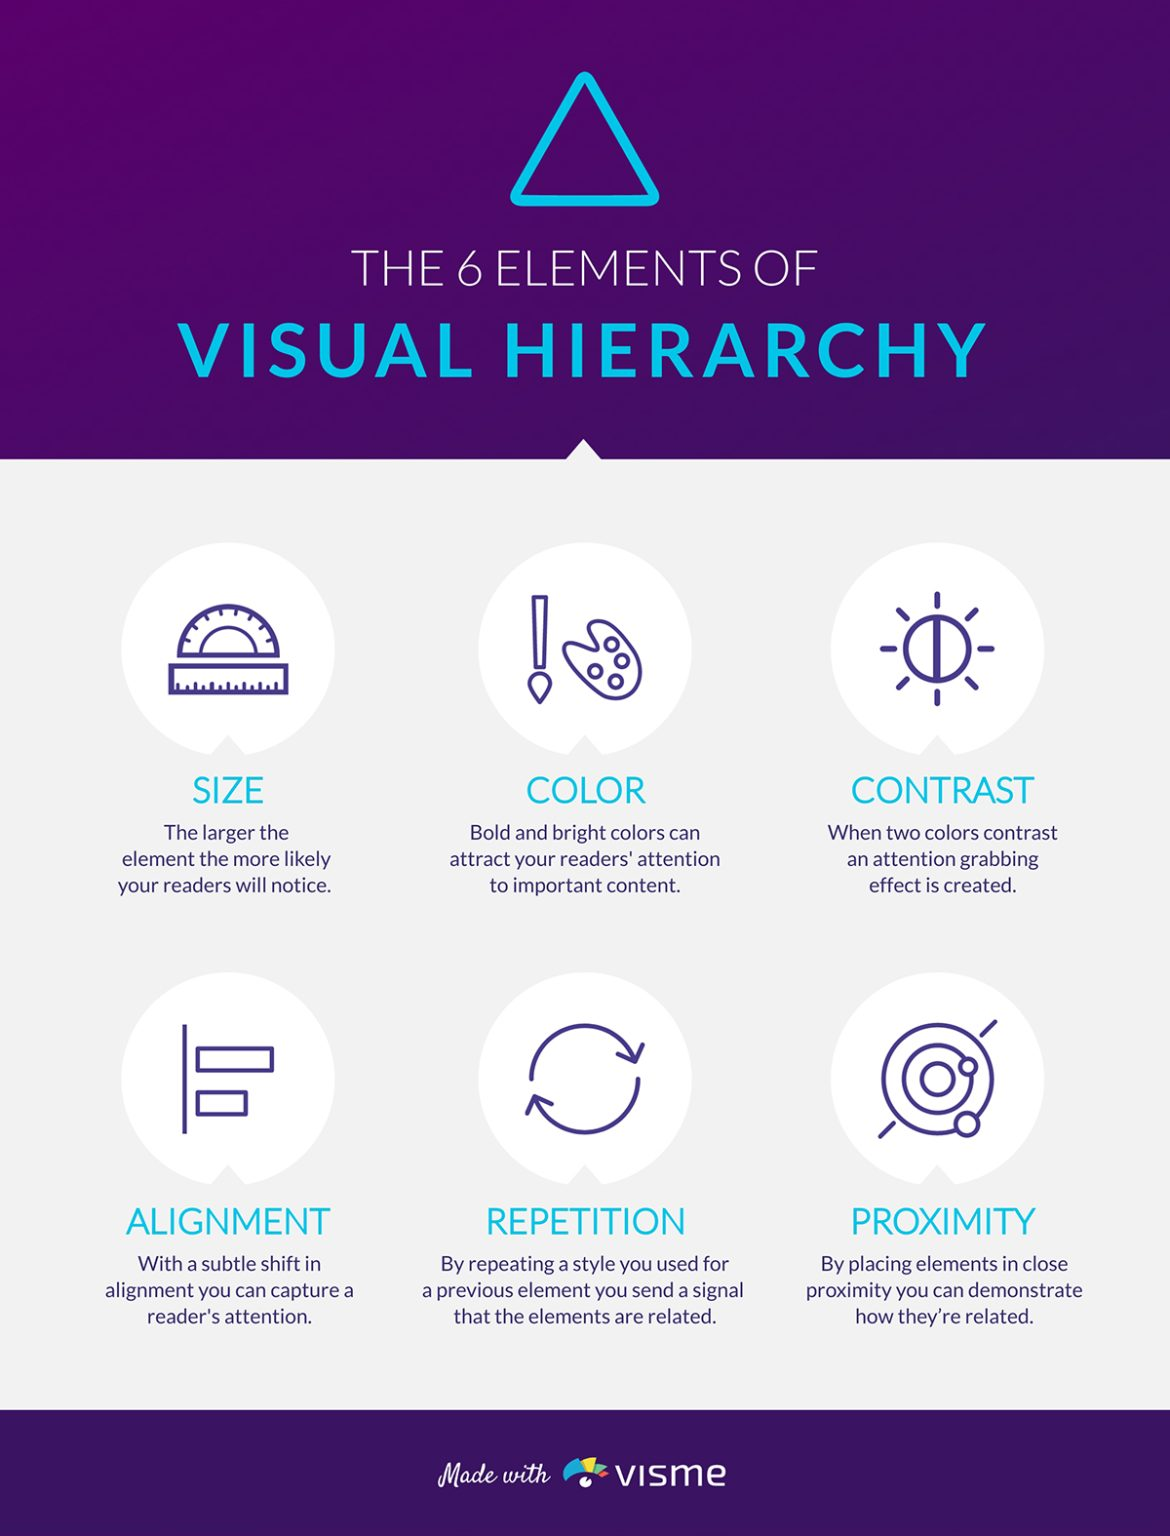 To write an infographic story effectively think about the visual hierarchy